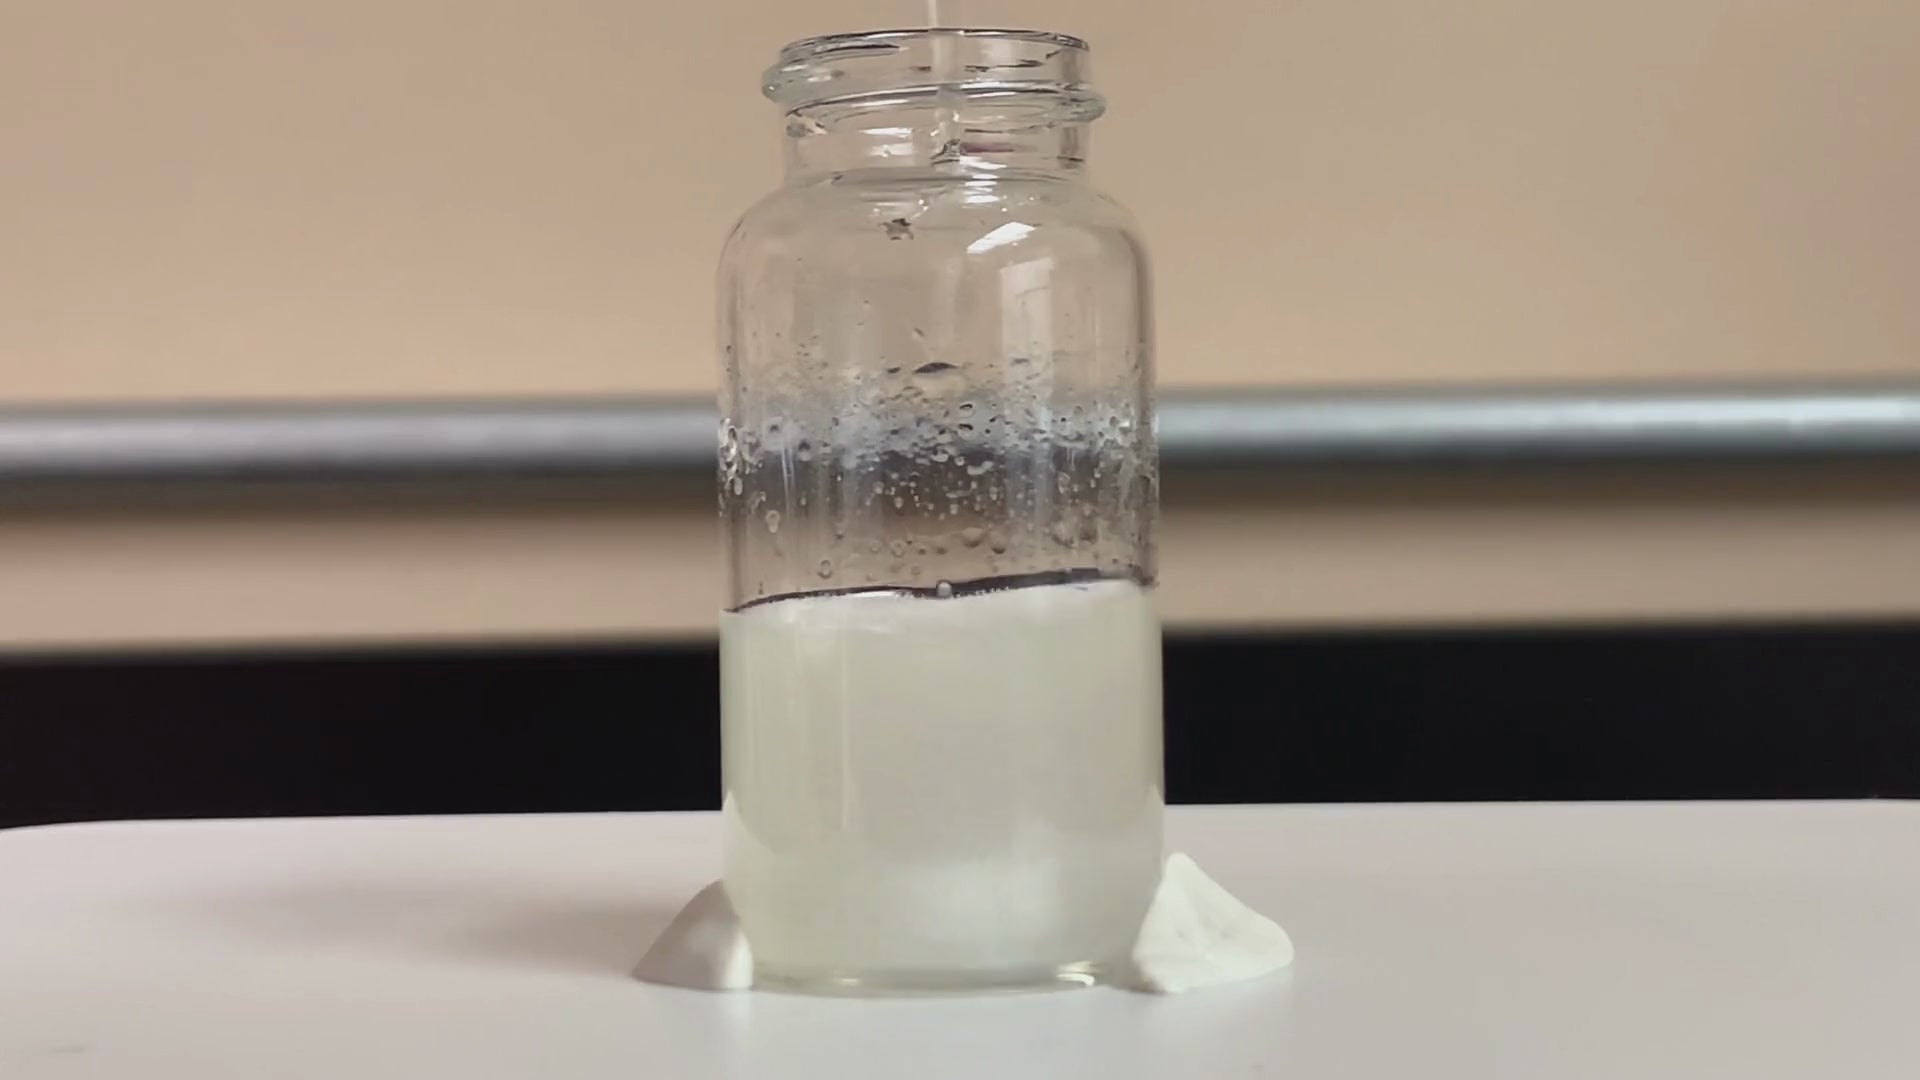 Load video: Showing how nanoemulsion nanoparticulates are formed, when the solution goes from cloudy to clear.